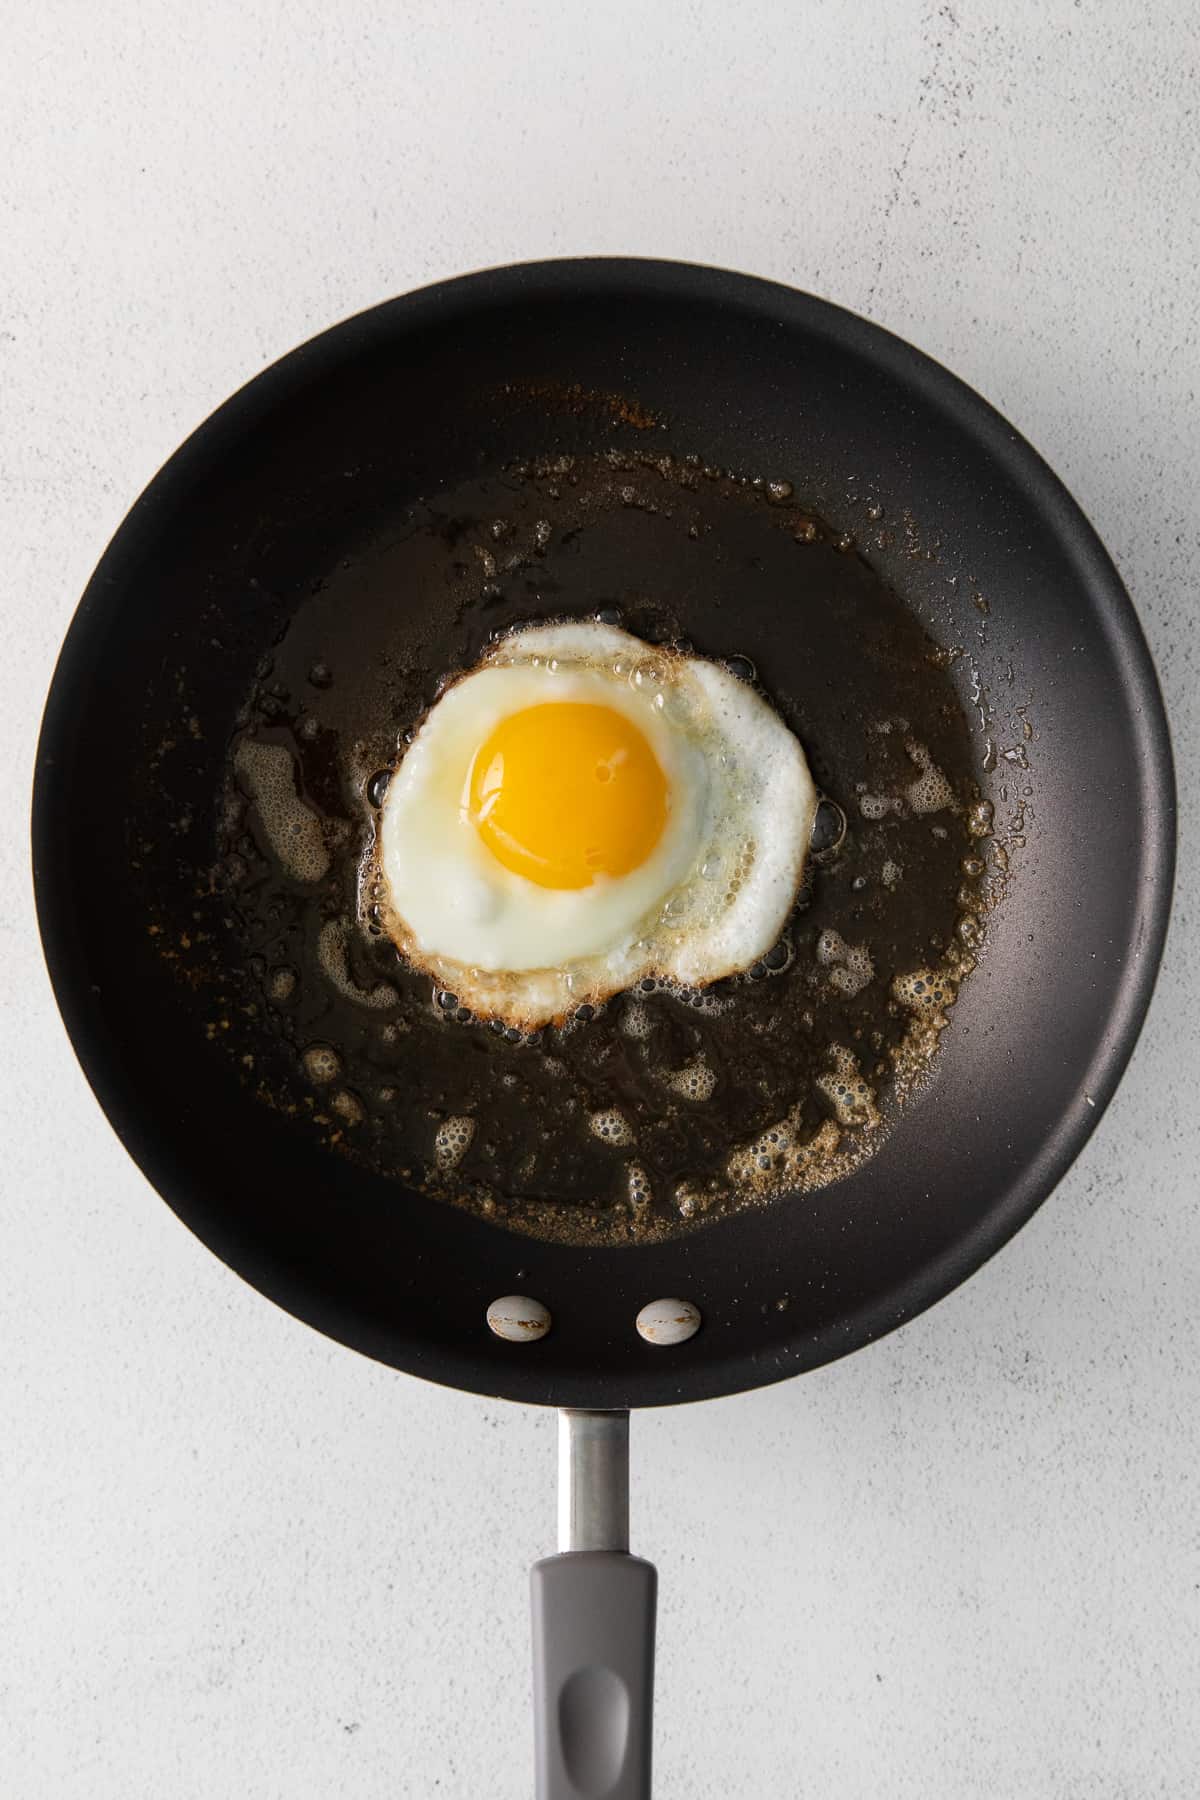 Nonstick Fry Pan: How to Fry an Egg 